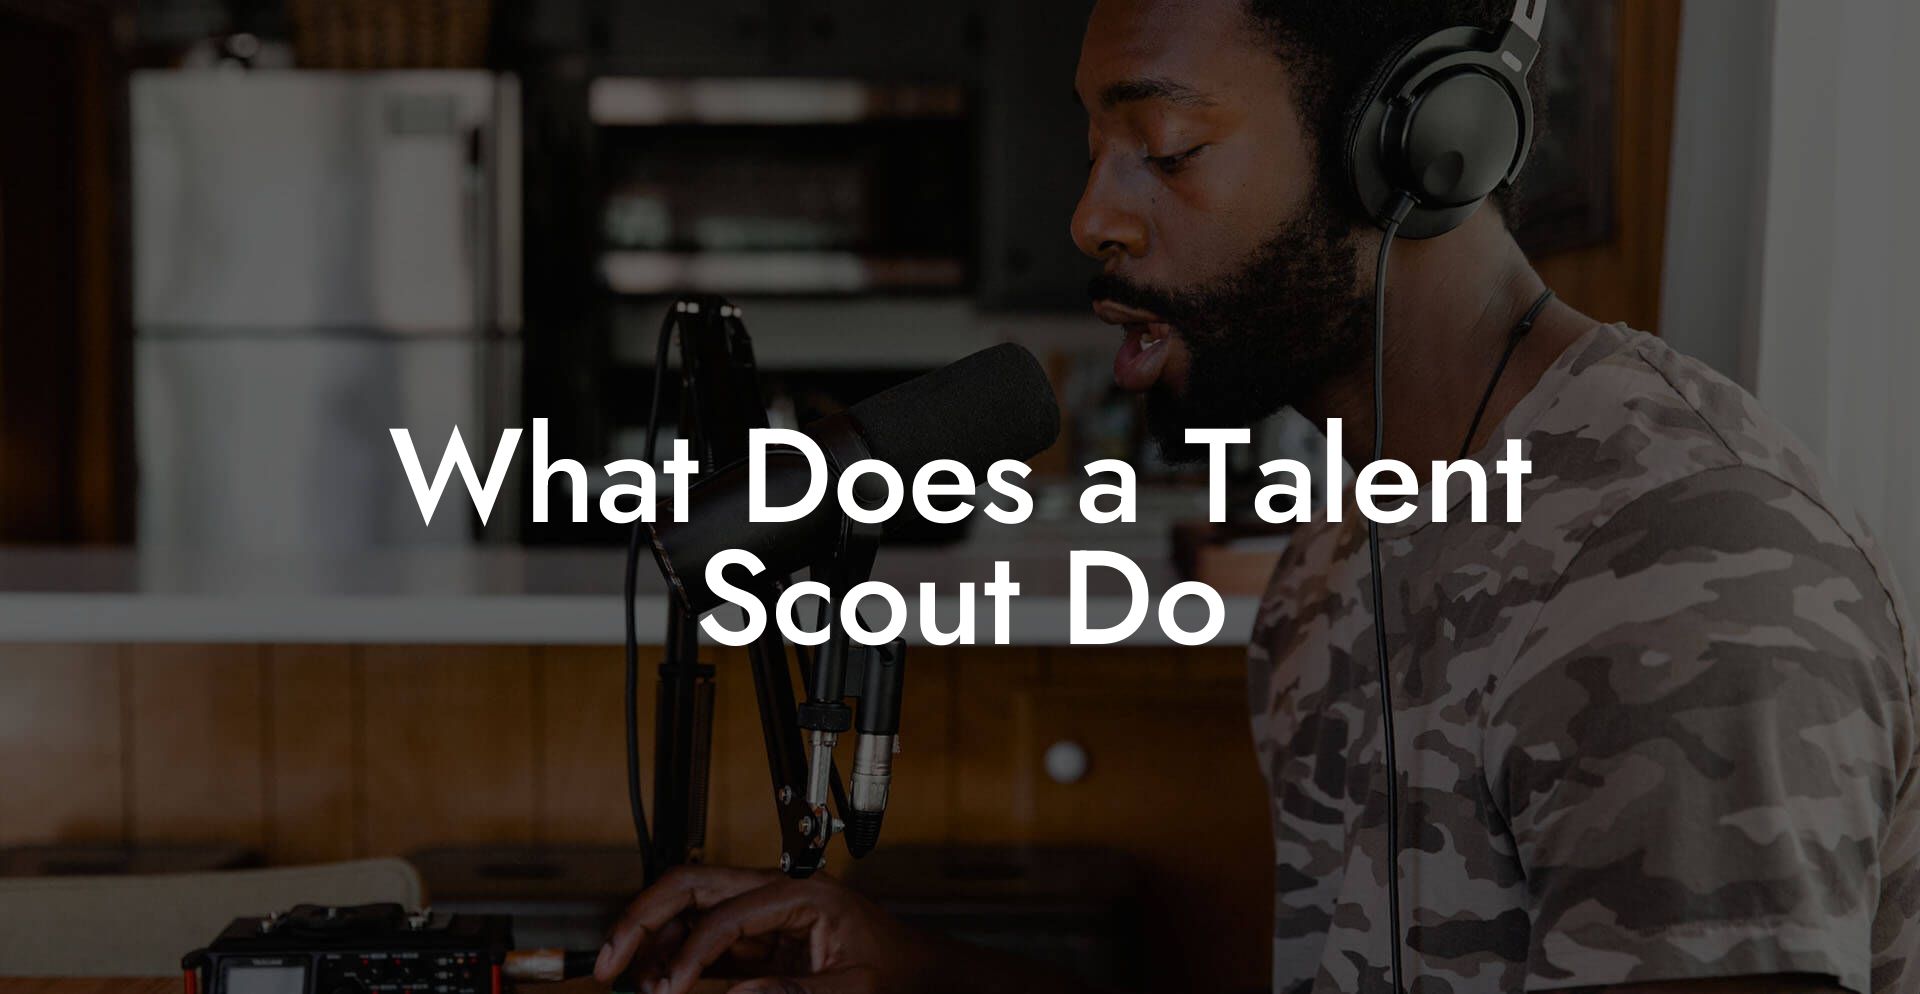 What Does a Talent Scout Do